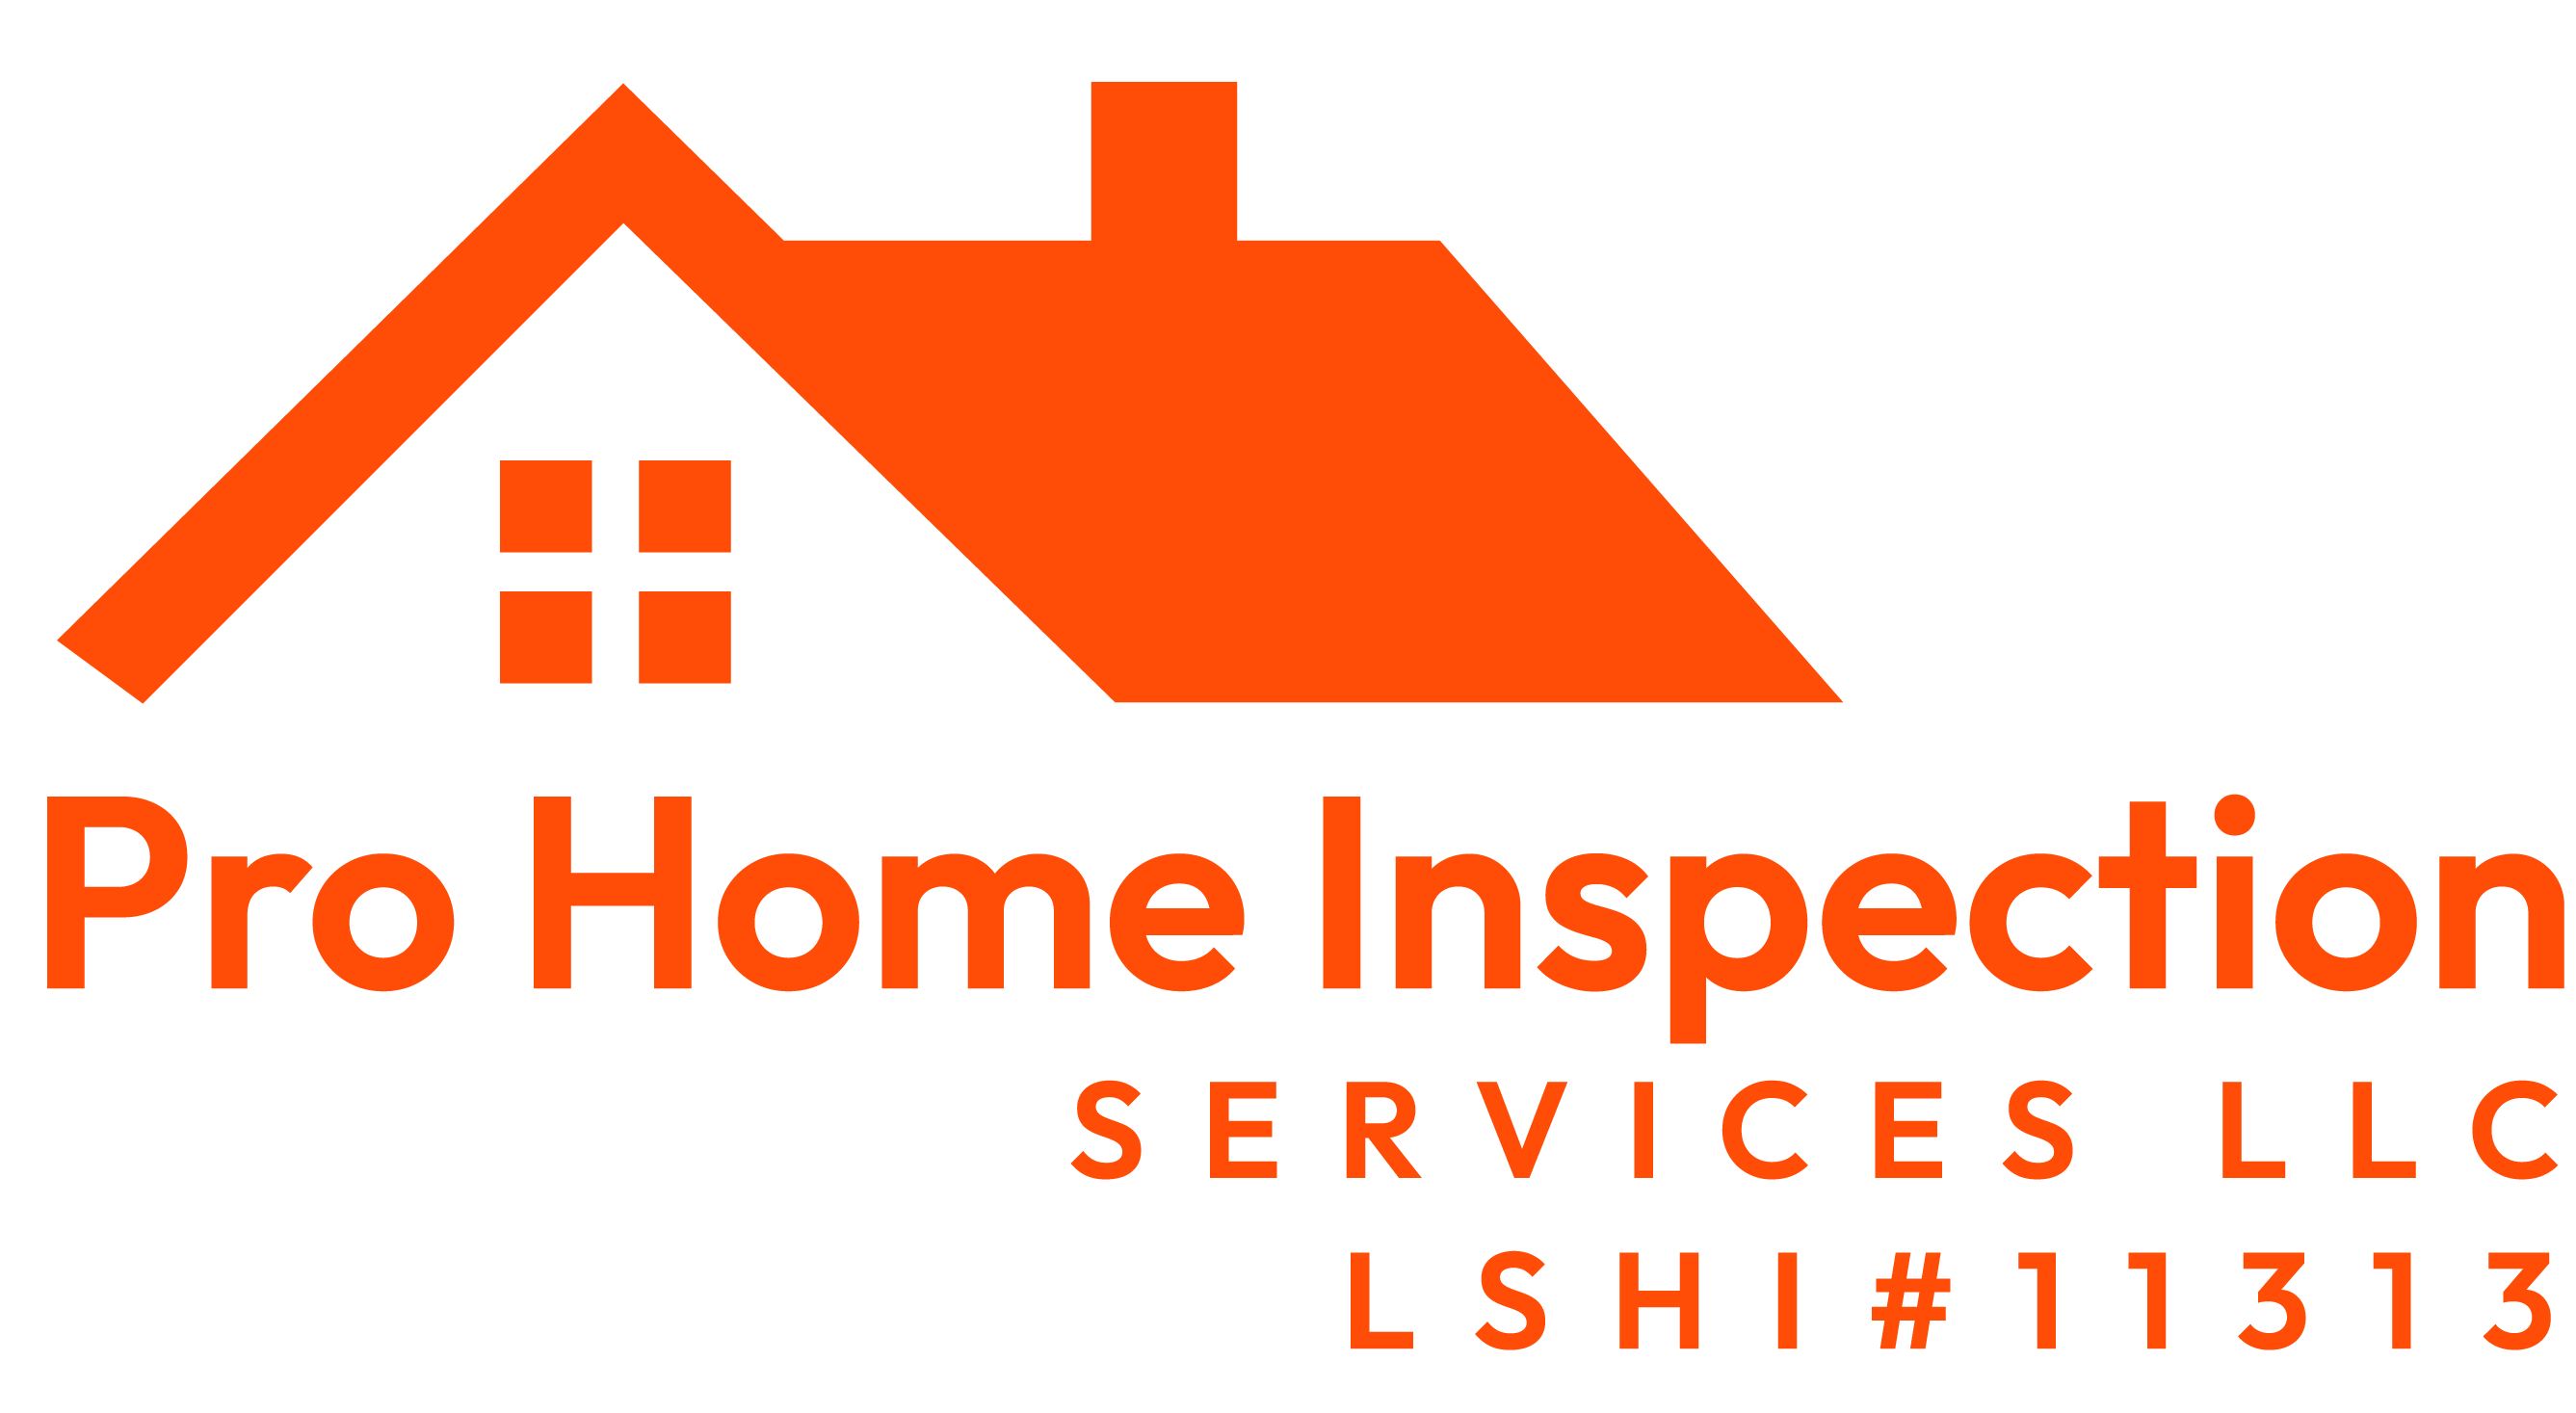 Pro Home Inspection